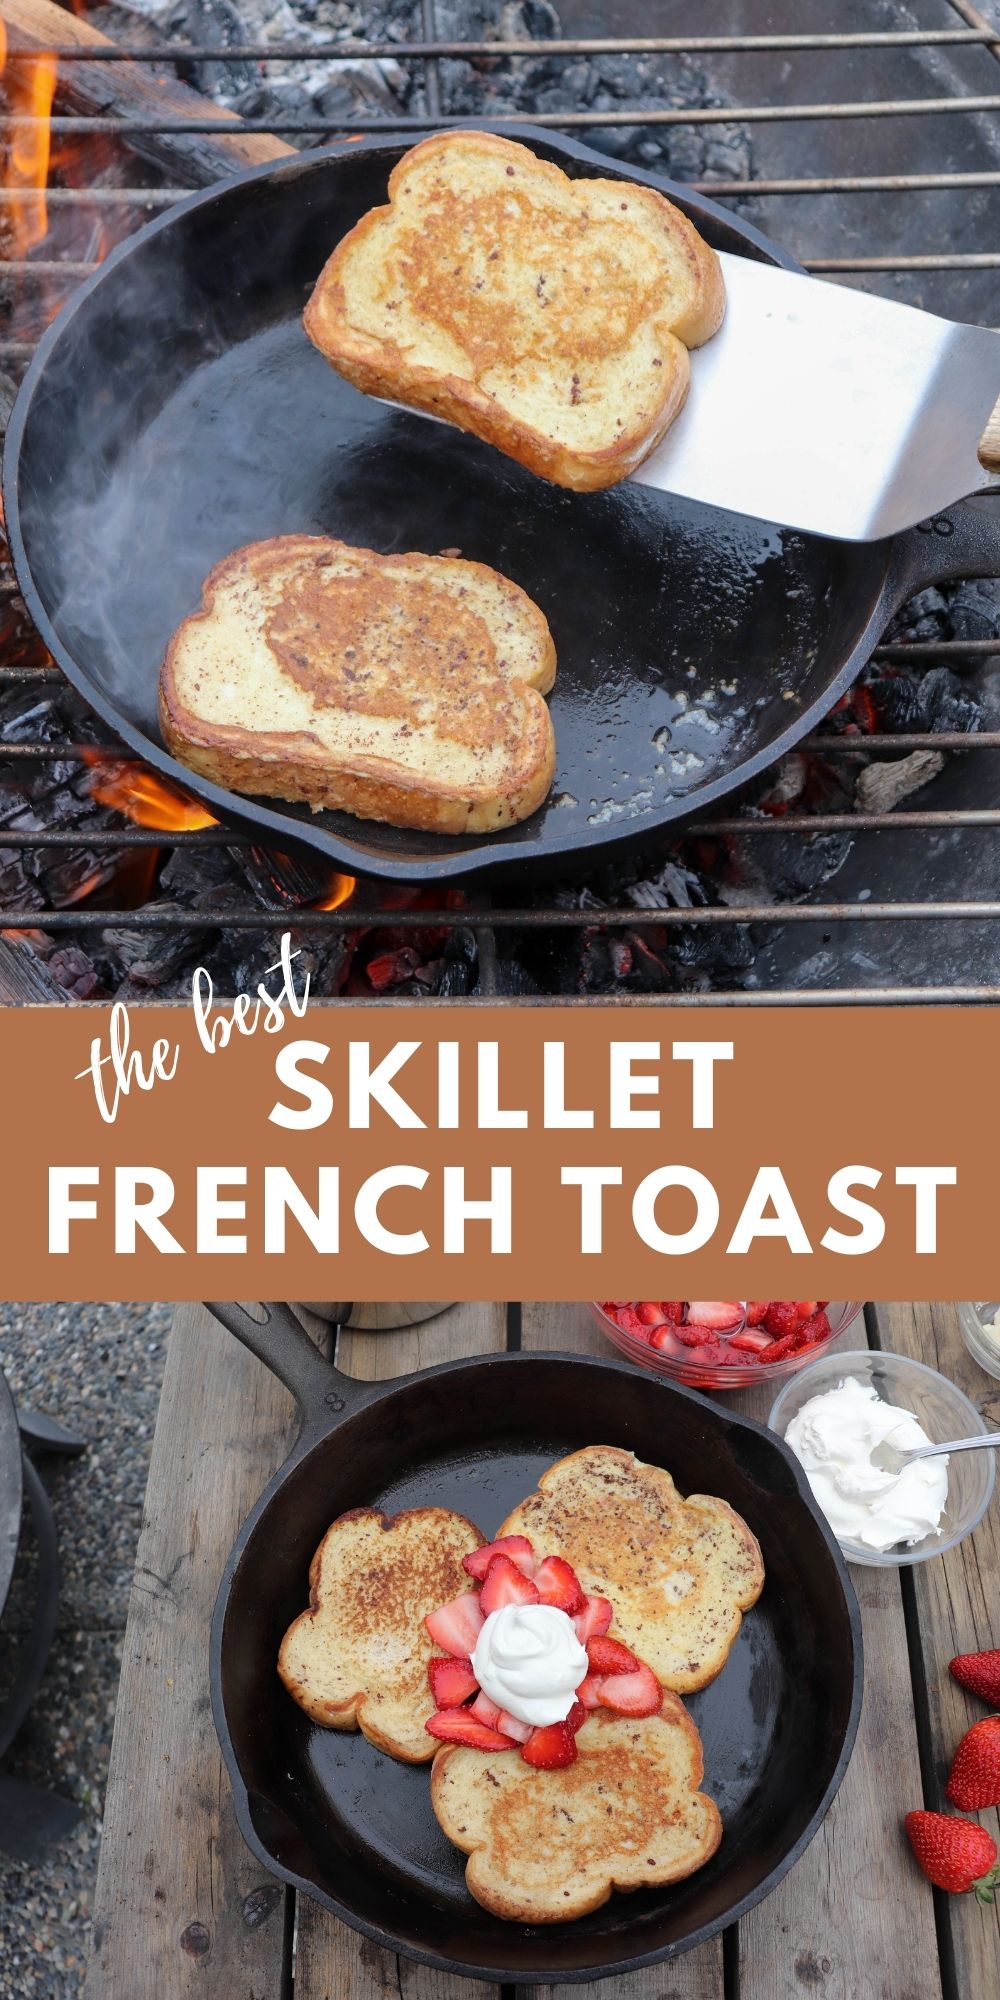 https://campfirefoodie.com/wp-content/uploads/2021/03/Skillet-French-Toast-Recipe6.jpg